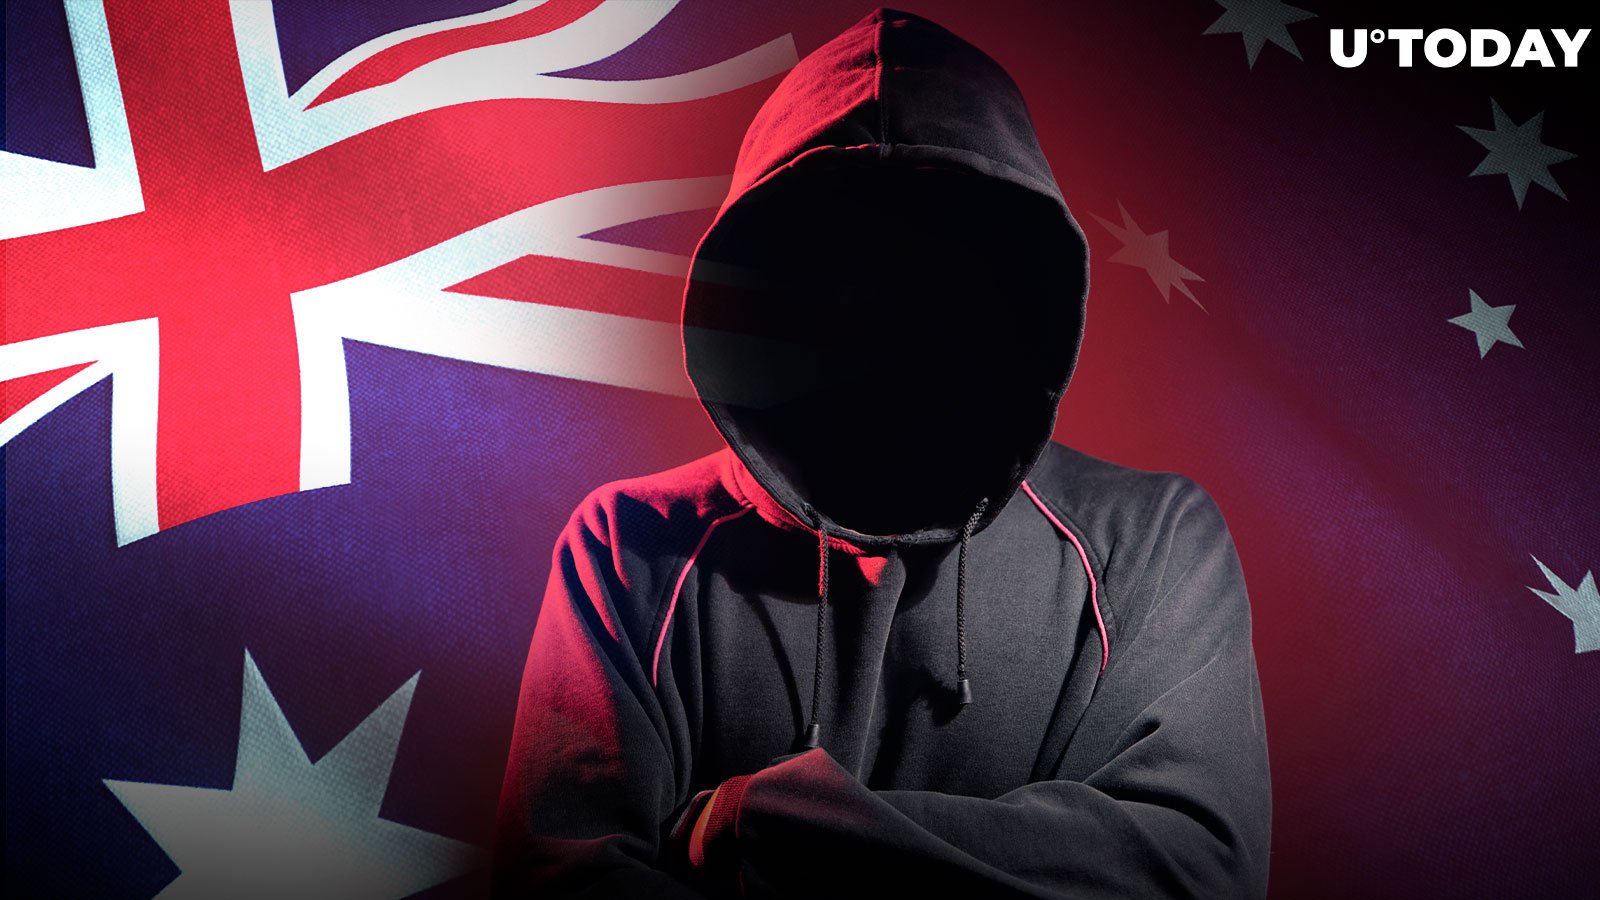 Australian Man Disappears After Receiving $500,000 in Crypto by Mistake